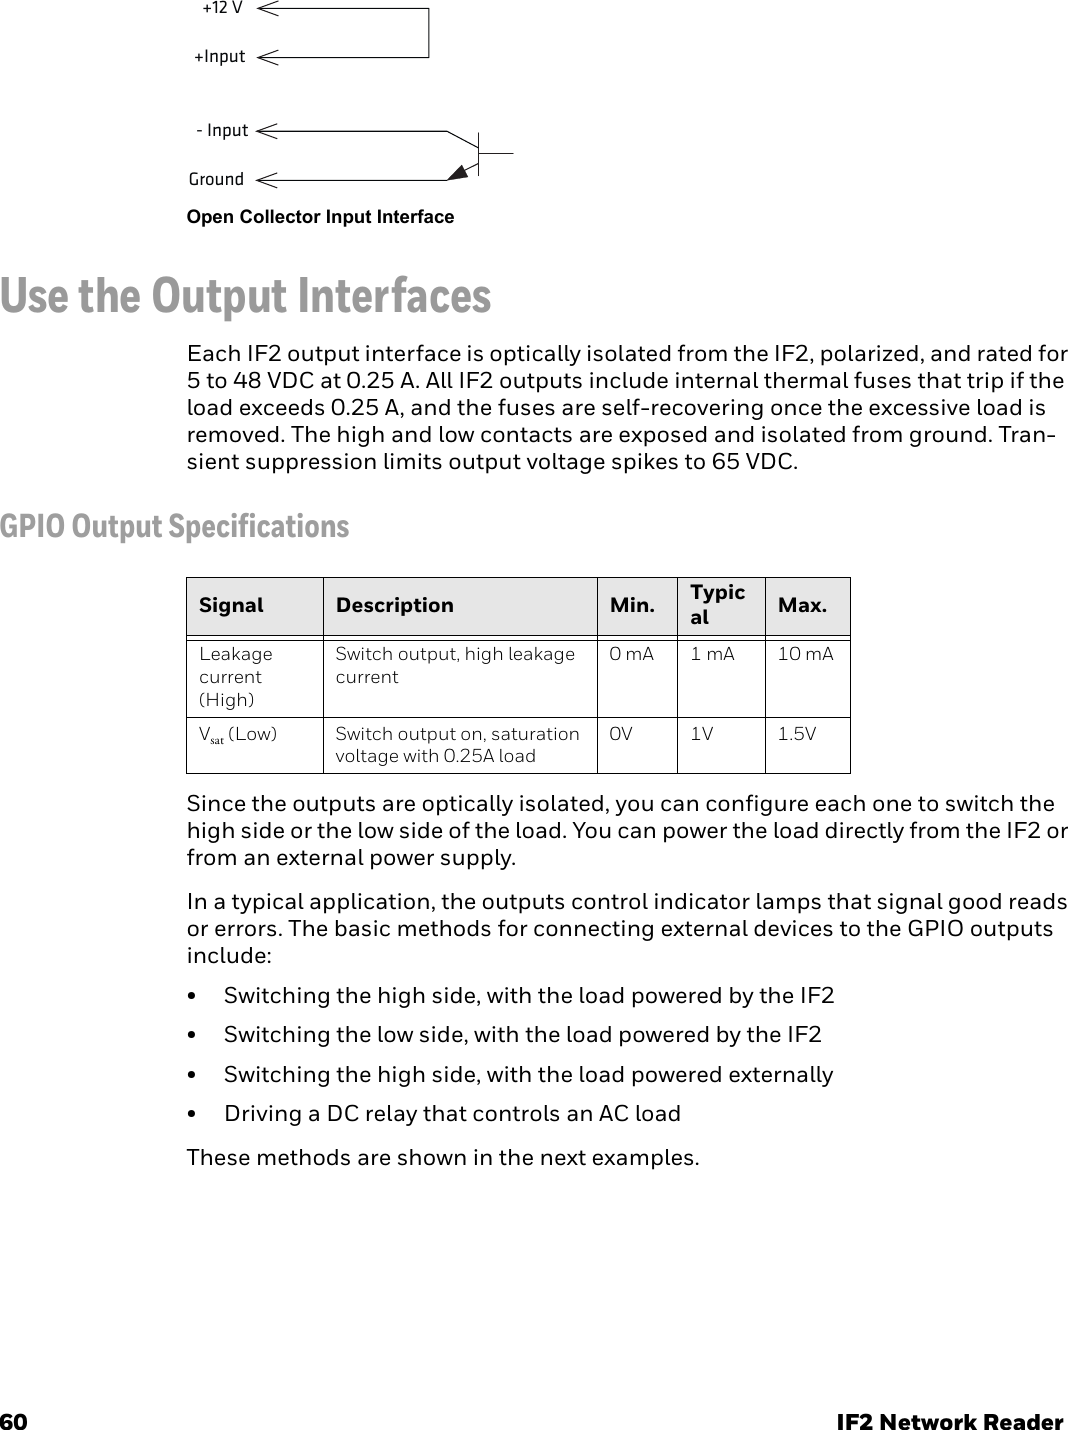 60 IF2 Network ReaderOpen Collector Input InterfaceUse the Output InterfacesEach IF2 output interface is optically isolated from the IF2, polarized, and rated for 5 to 48 VDC at 0.25 A. All IF2 outputs include internal thermal fuses that trip if the load exceeds 0.25 A, and the fuses are self-recovering once the excessive load is removed. The high and low contacts are exposed and isolated from ground. Tran-sient suppression limits output voltage spikes to 65 VDC.GPIO Output SpecificationsSince the outputs are optically isolated, you can configure each one to switch the high side or the low side of the load. You can power the load directly from the IF2 or from an external power supply.In a typical application, the outputs control indicator lamps that signal good reads or errors. The basic methods for connecting external devices to the GPIO outputs include:• Switching the high side, with the load powered by the IF2• Switching the low side, with the load powered by the IF2• Switching the high side, with the load powered externally• Driving a DC relay that controls an AC loadThese methods are shown in the next examples.+Input+12 VGround- InputSignal Description Min. Typical Max.Leakage current (High)Switch output, high leakage current0 mA 1 mA 10 mAVsat (Low) Switch output on, saturation voltage with 0.25A load0V 1V 1.5V